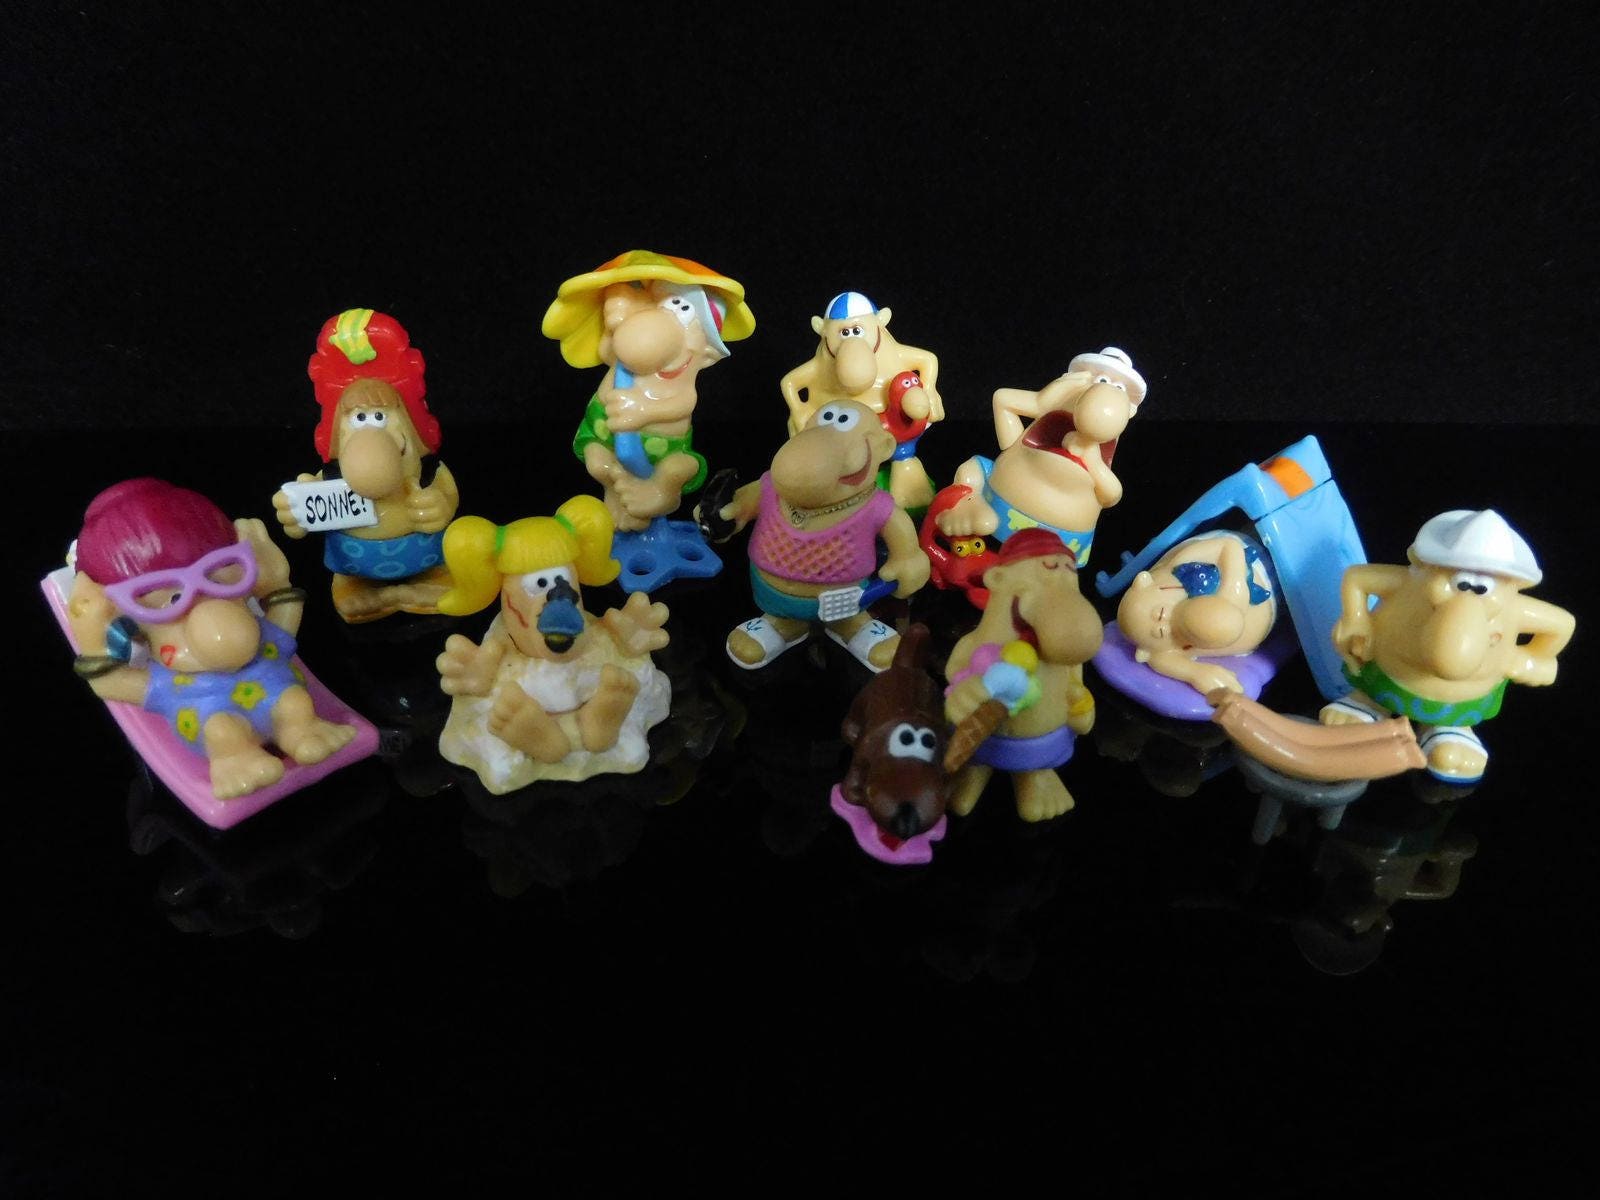 Vintage Toys, Collectible, SMURFS 1990, FOOTBALL Smurfs, Complete Series of  12 Figures, Vintage KINDER Surprise Figurines, Xmas Gift 